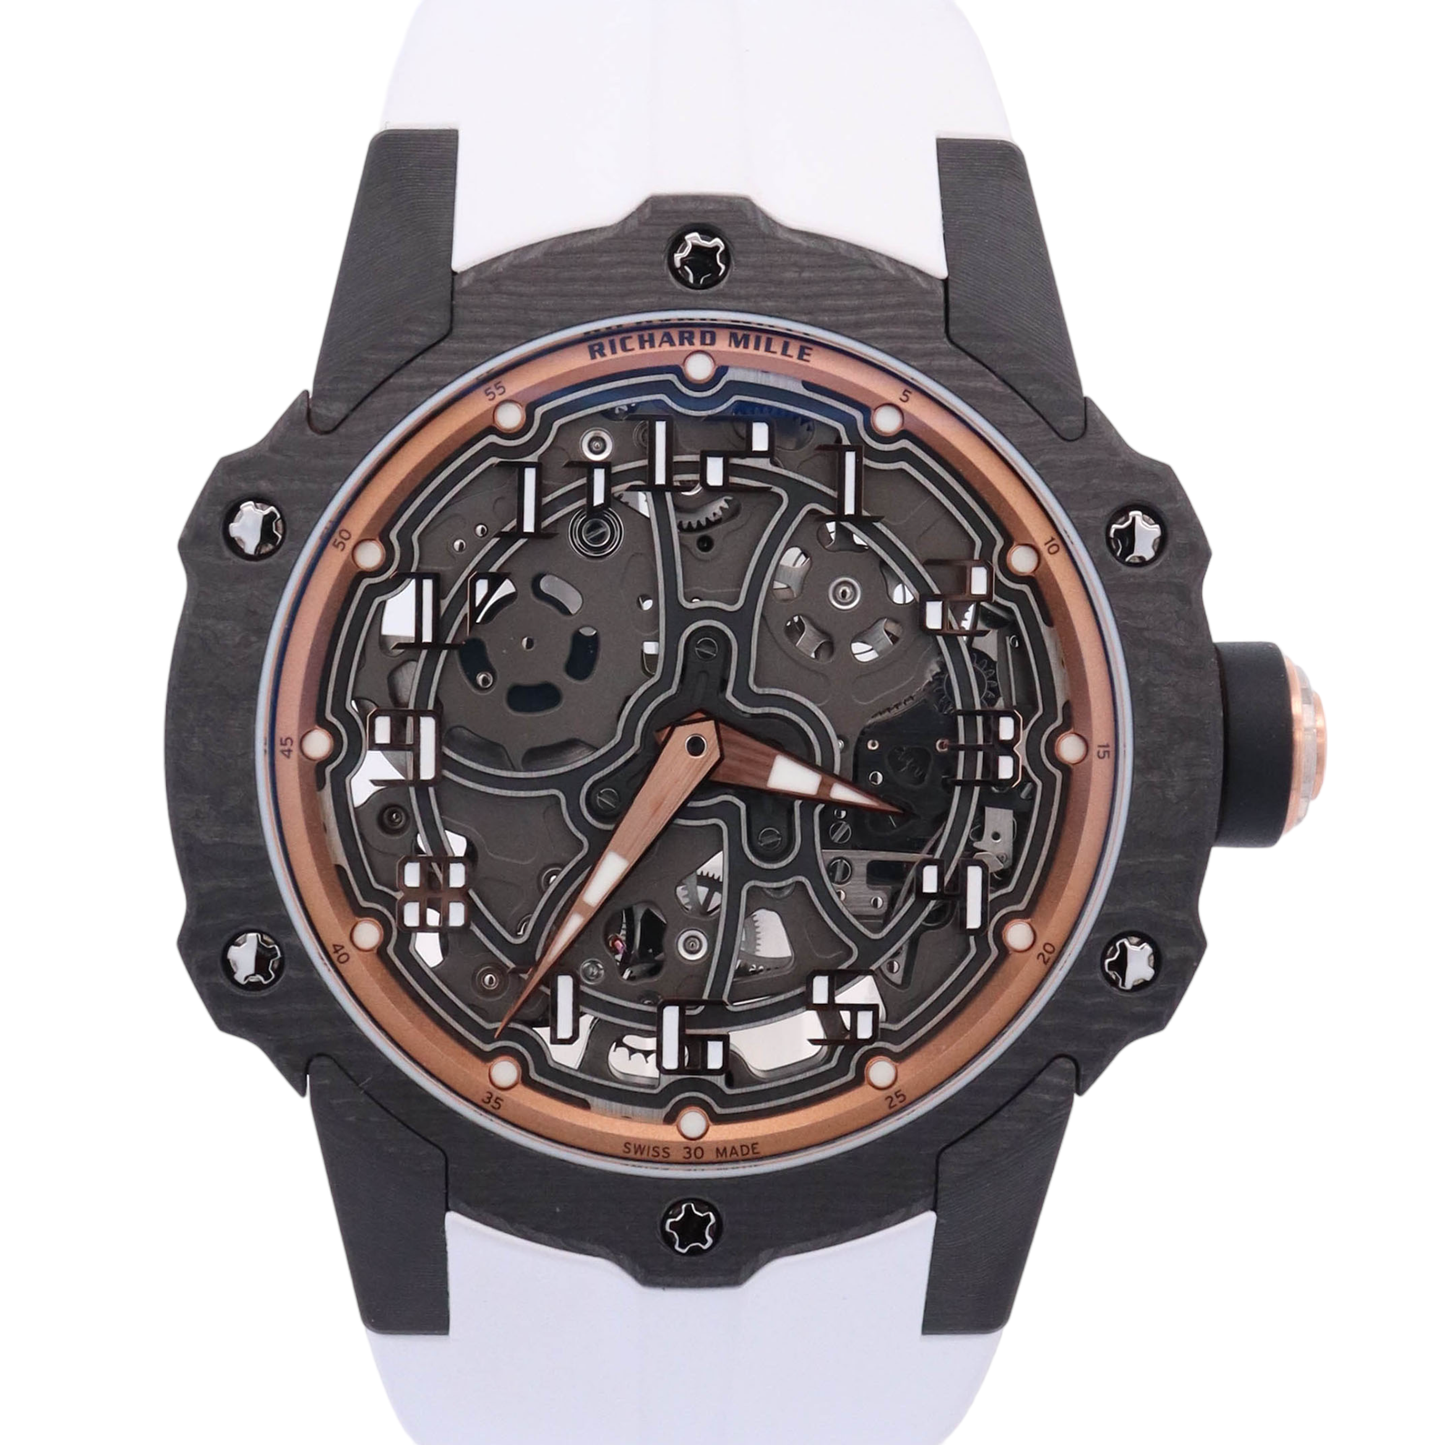 Richard Mile RM 33-02 41.77mm Carbon TPT Skeleton Dial Watch Reference# RM33-02 - Happy Jewelers Fine Jewelry Lifetime Warranty